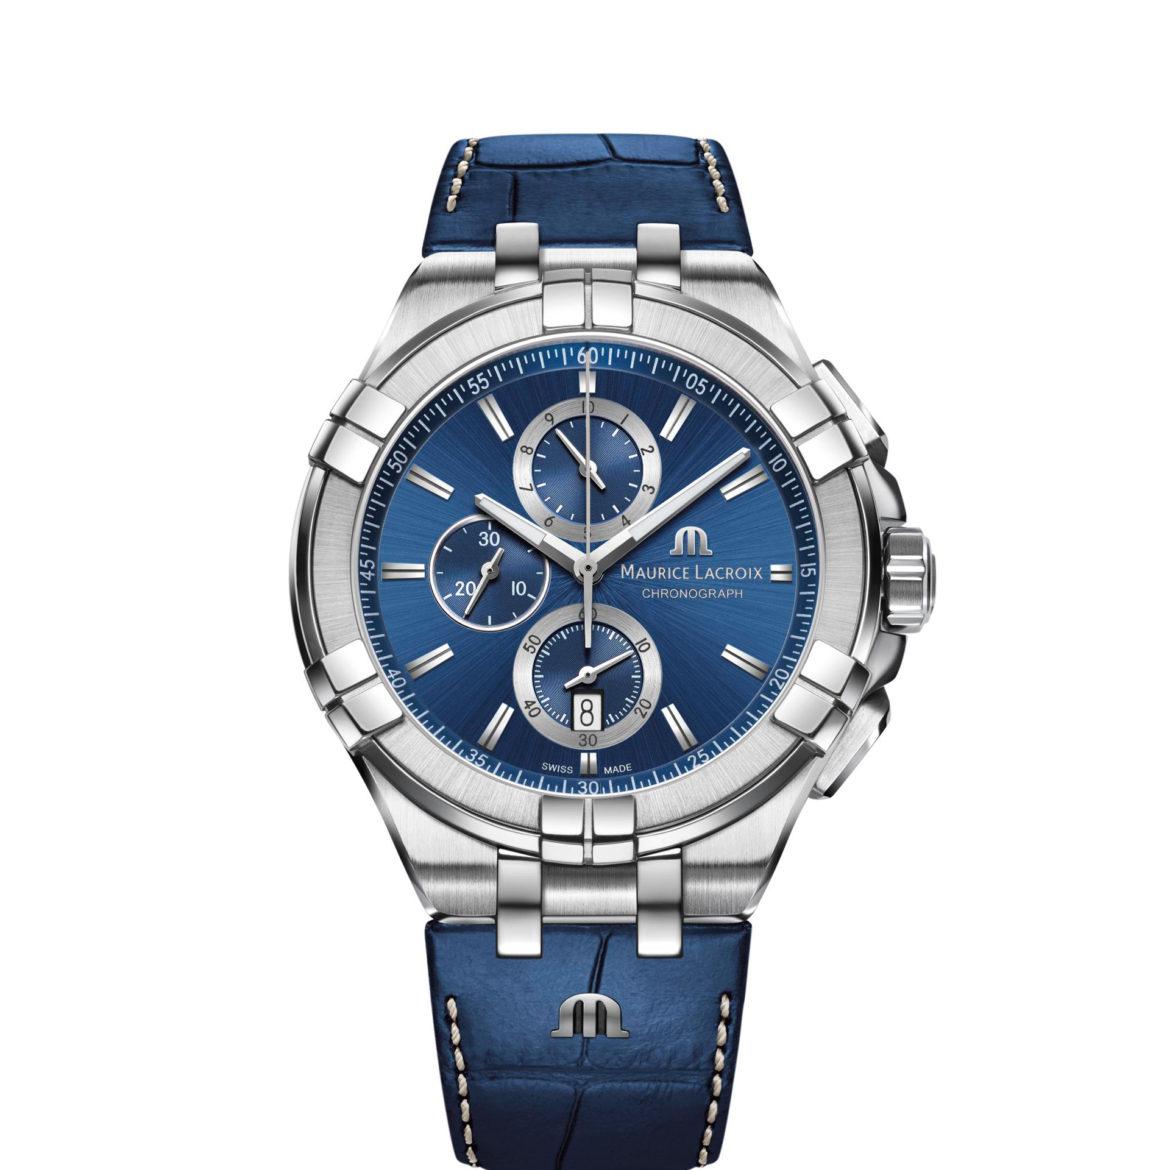 Maurice Lacroix Aikon Chronograph 44 mm in blue